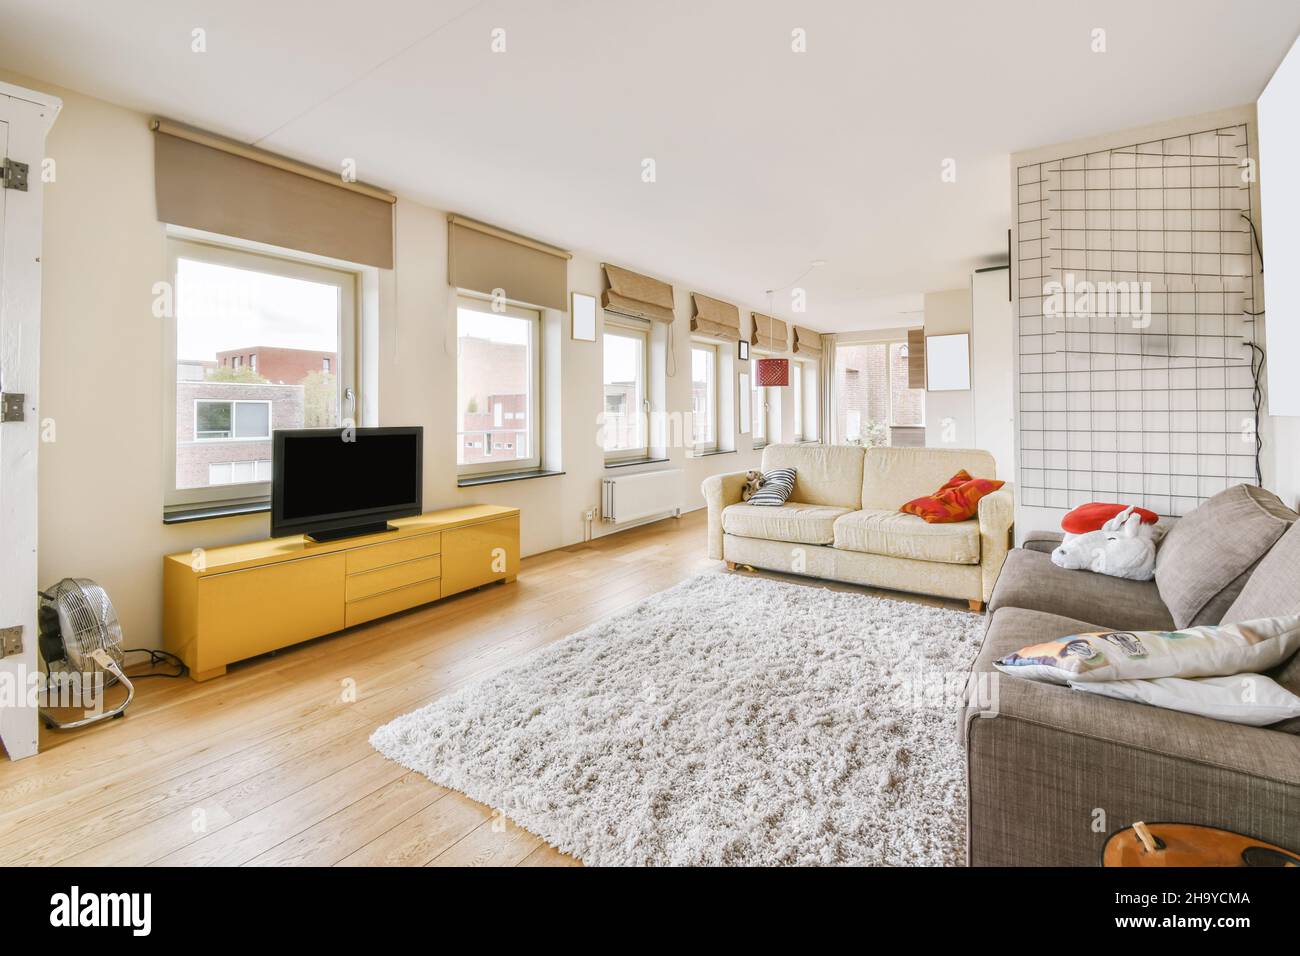 Lovely living room with milky and gray sofas and shaggy carpet Stock Photo